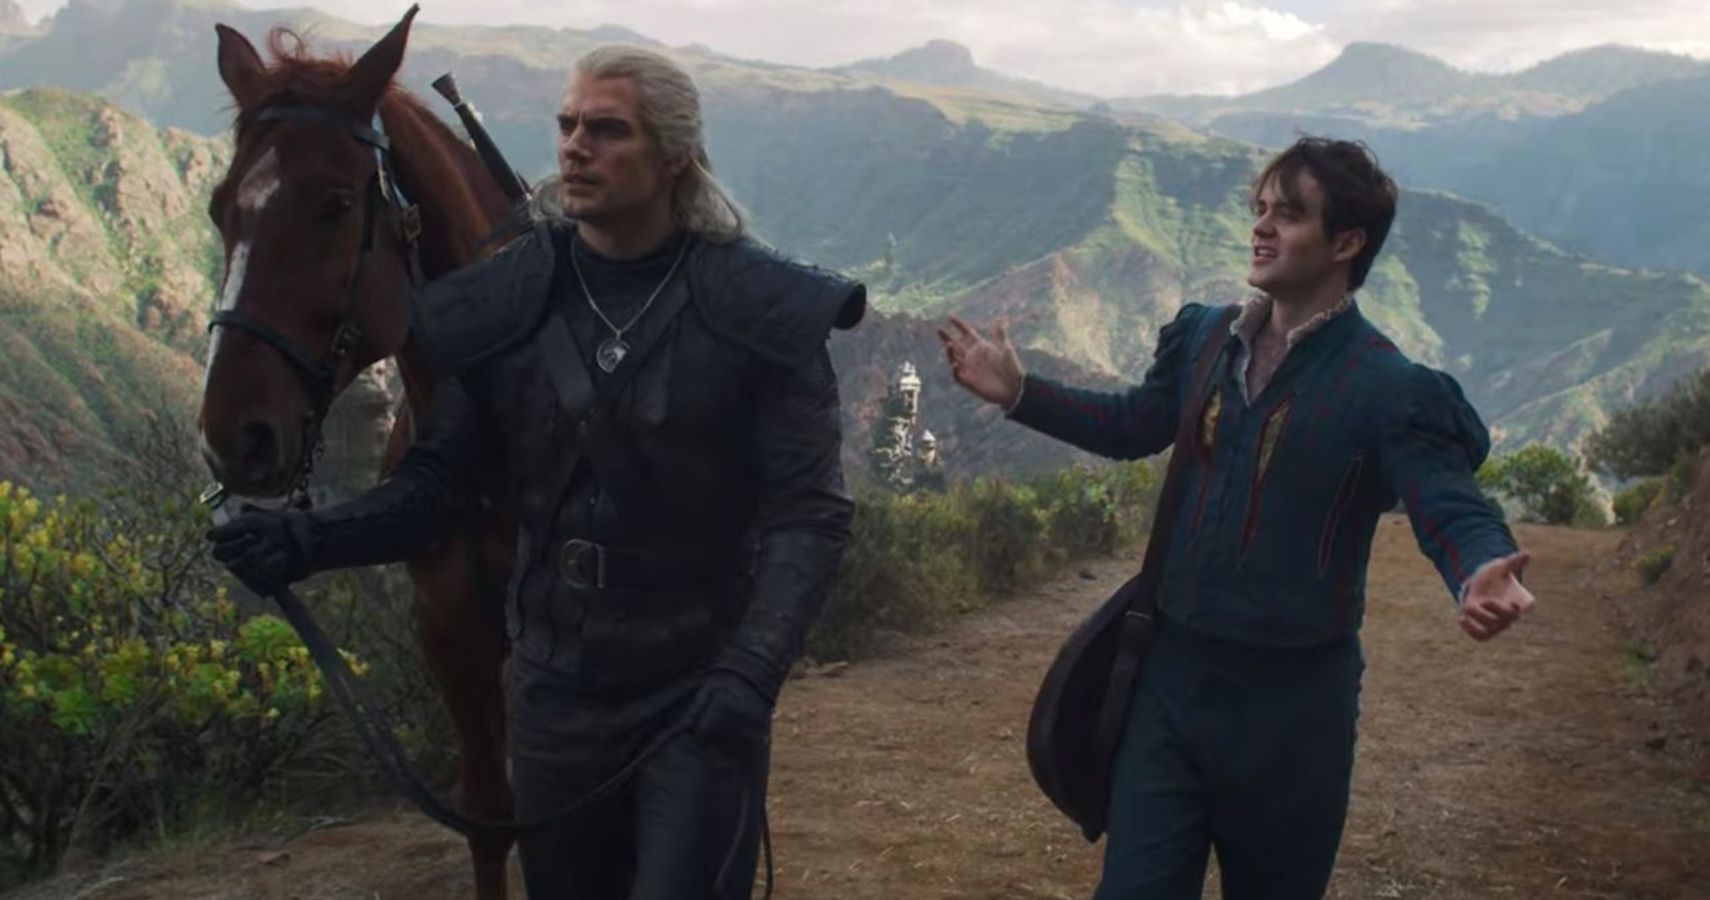 geralt and jaskier walking along with a horse.